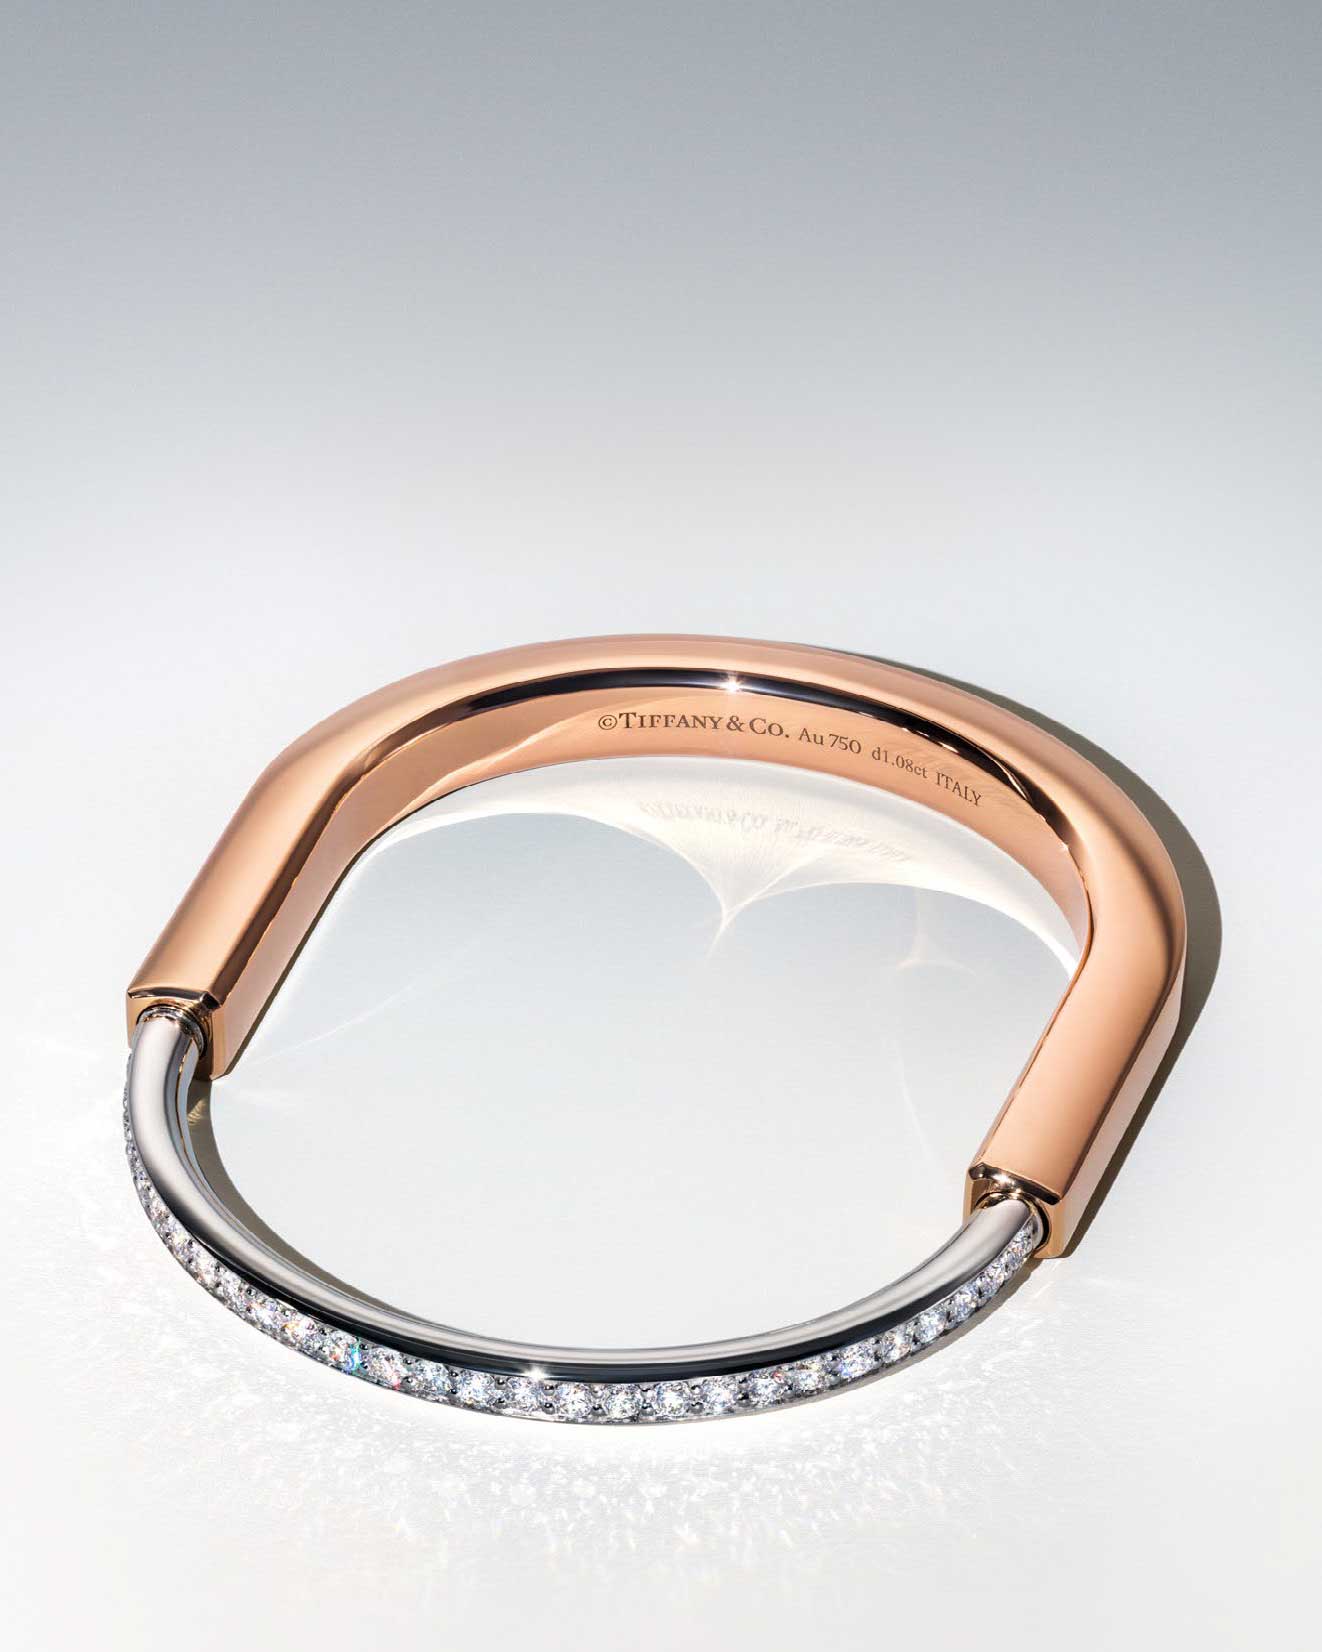 Tiffany & Co. Debuts Lock Collection's Genderless Gold Bracelets